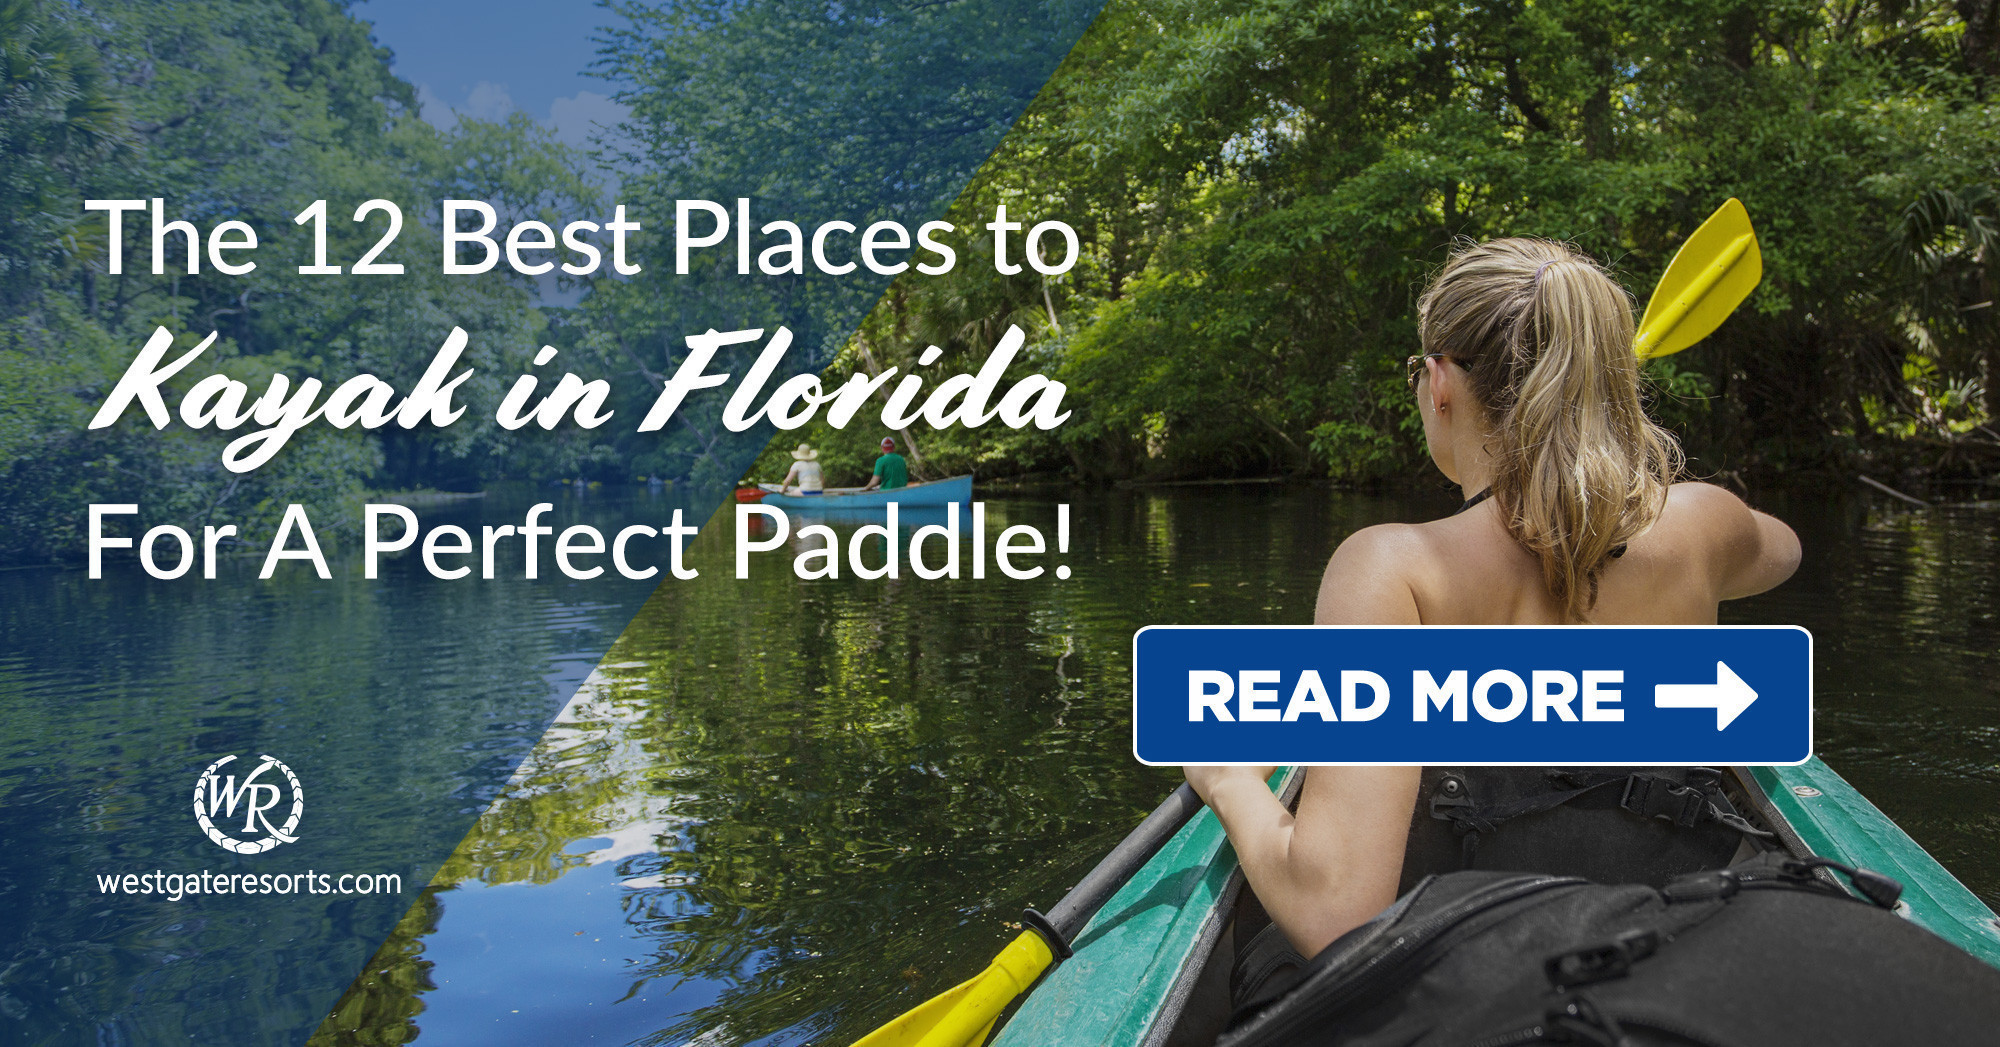 The 12 Best Places to Kayak in Florida For a Perfect Paddle!